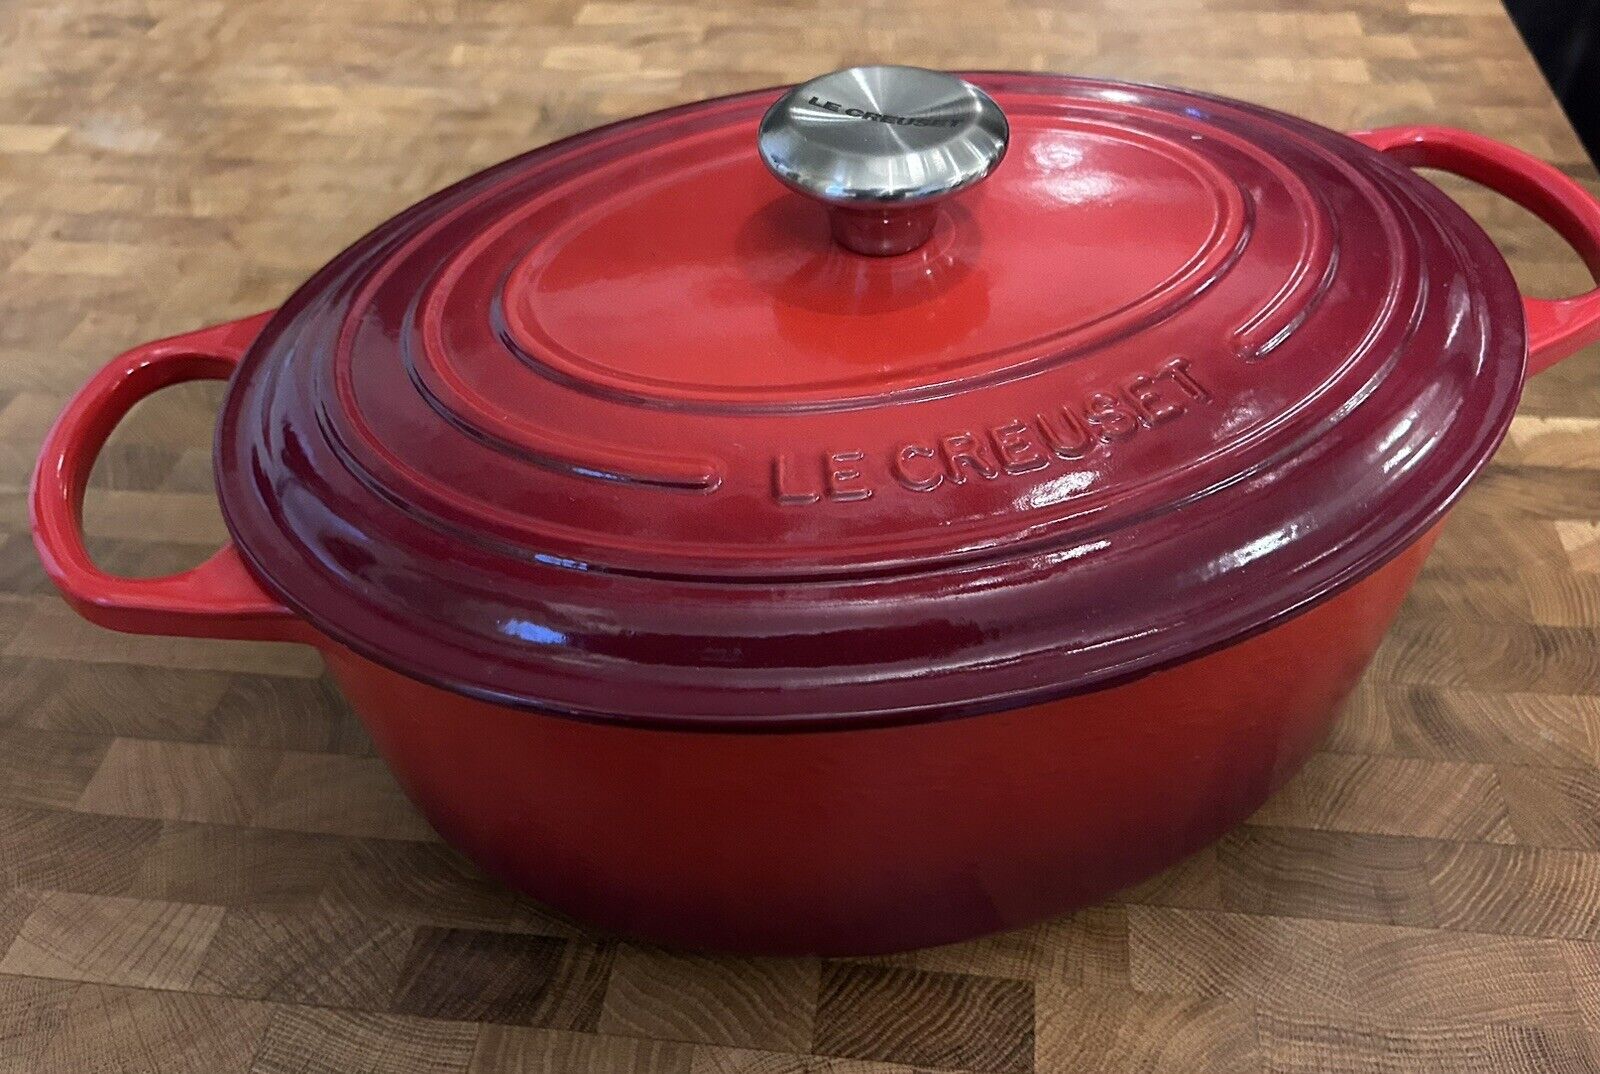 Le Creuset 6.75 qt 6 3/4 French Dutch Oven Cerise Red - New, Not In Box